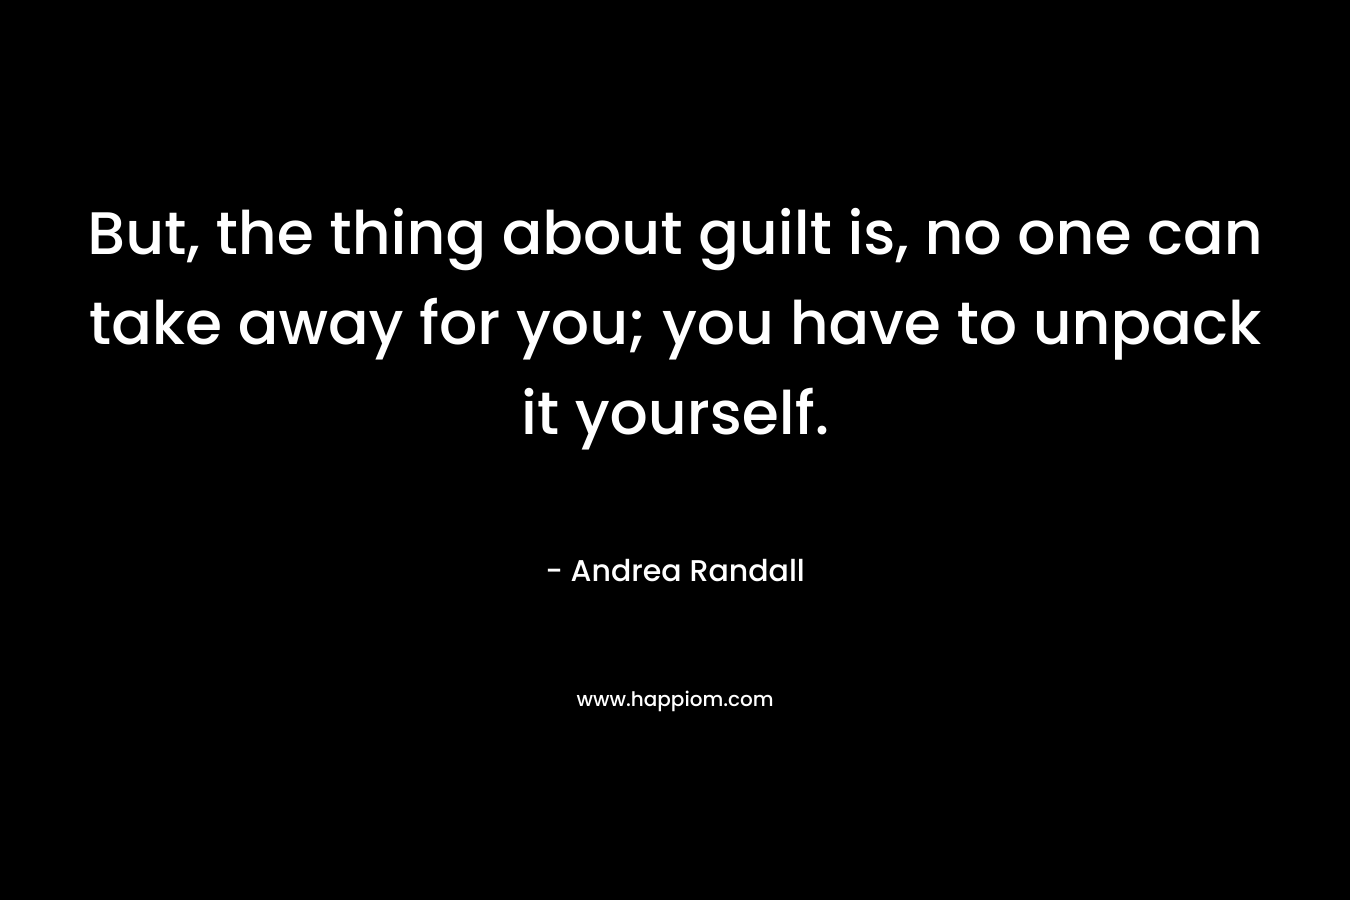 But, the thing about guilt is, no one can take away for you; you have to unpack it yourself. – Andrea Randall